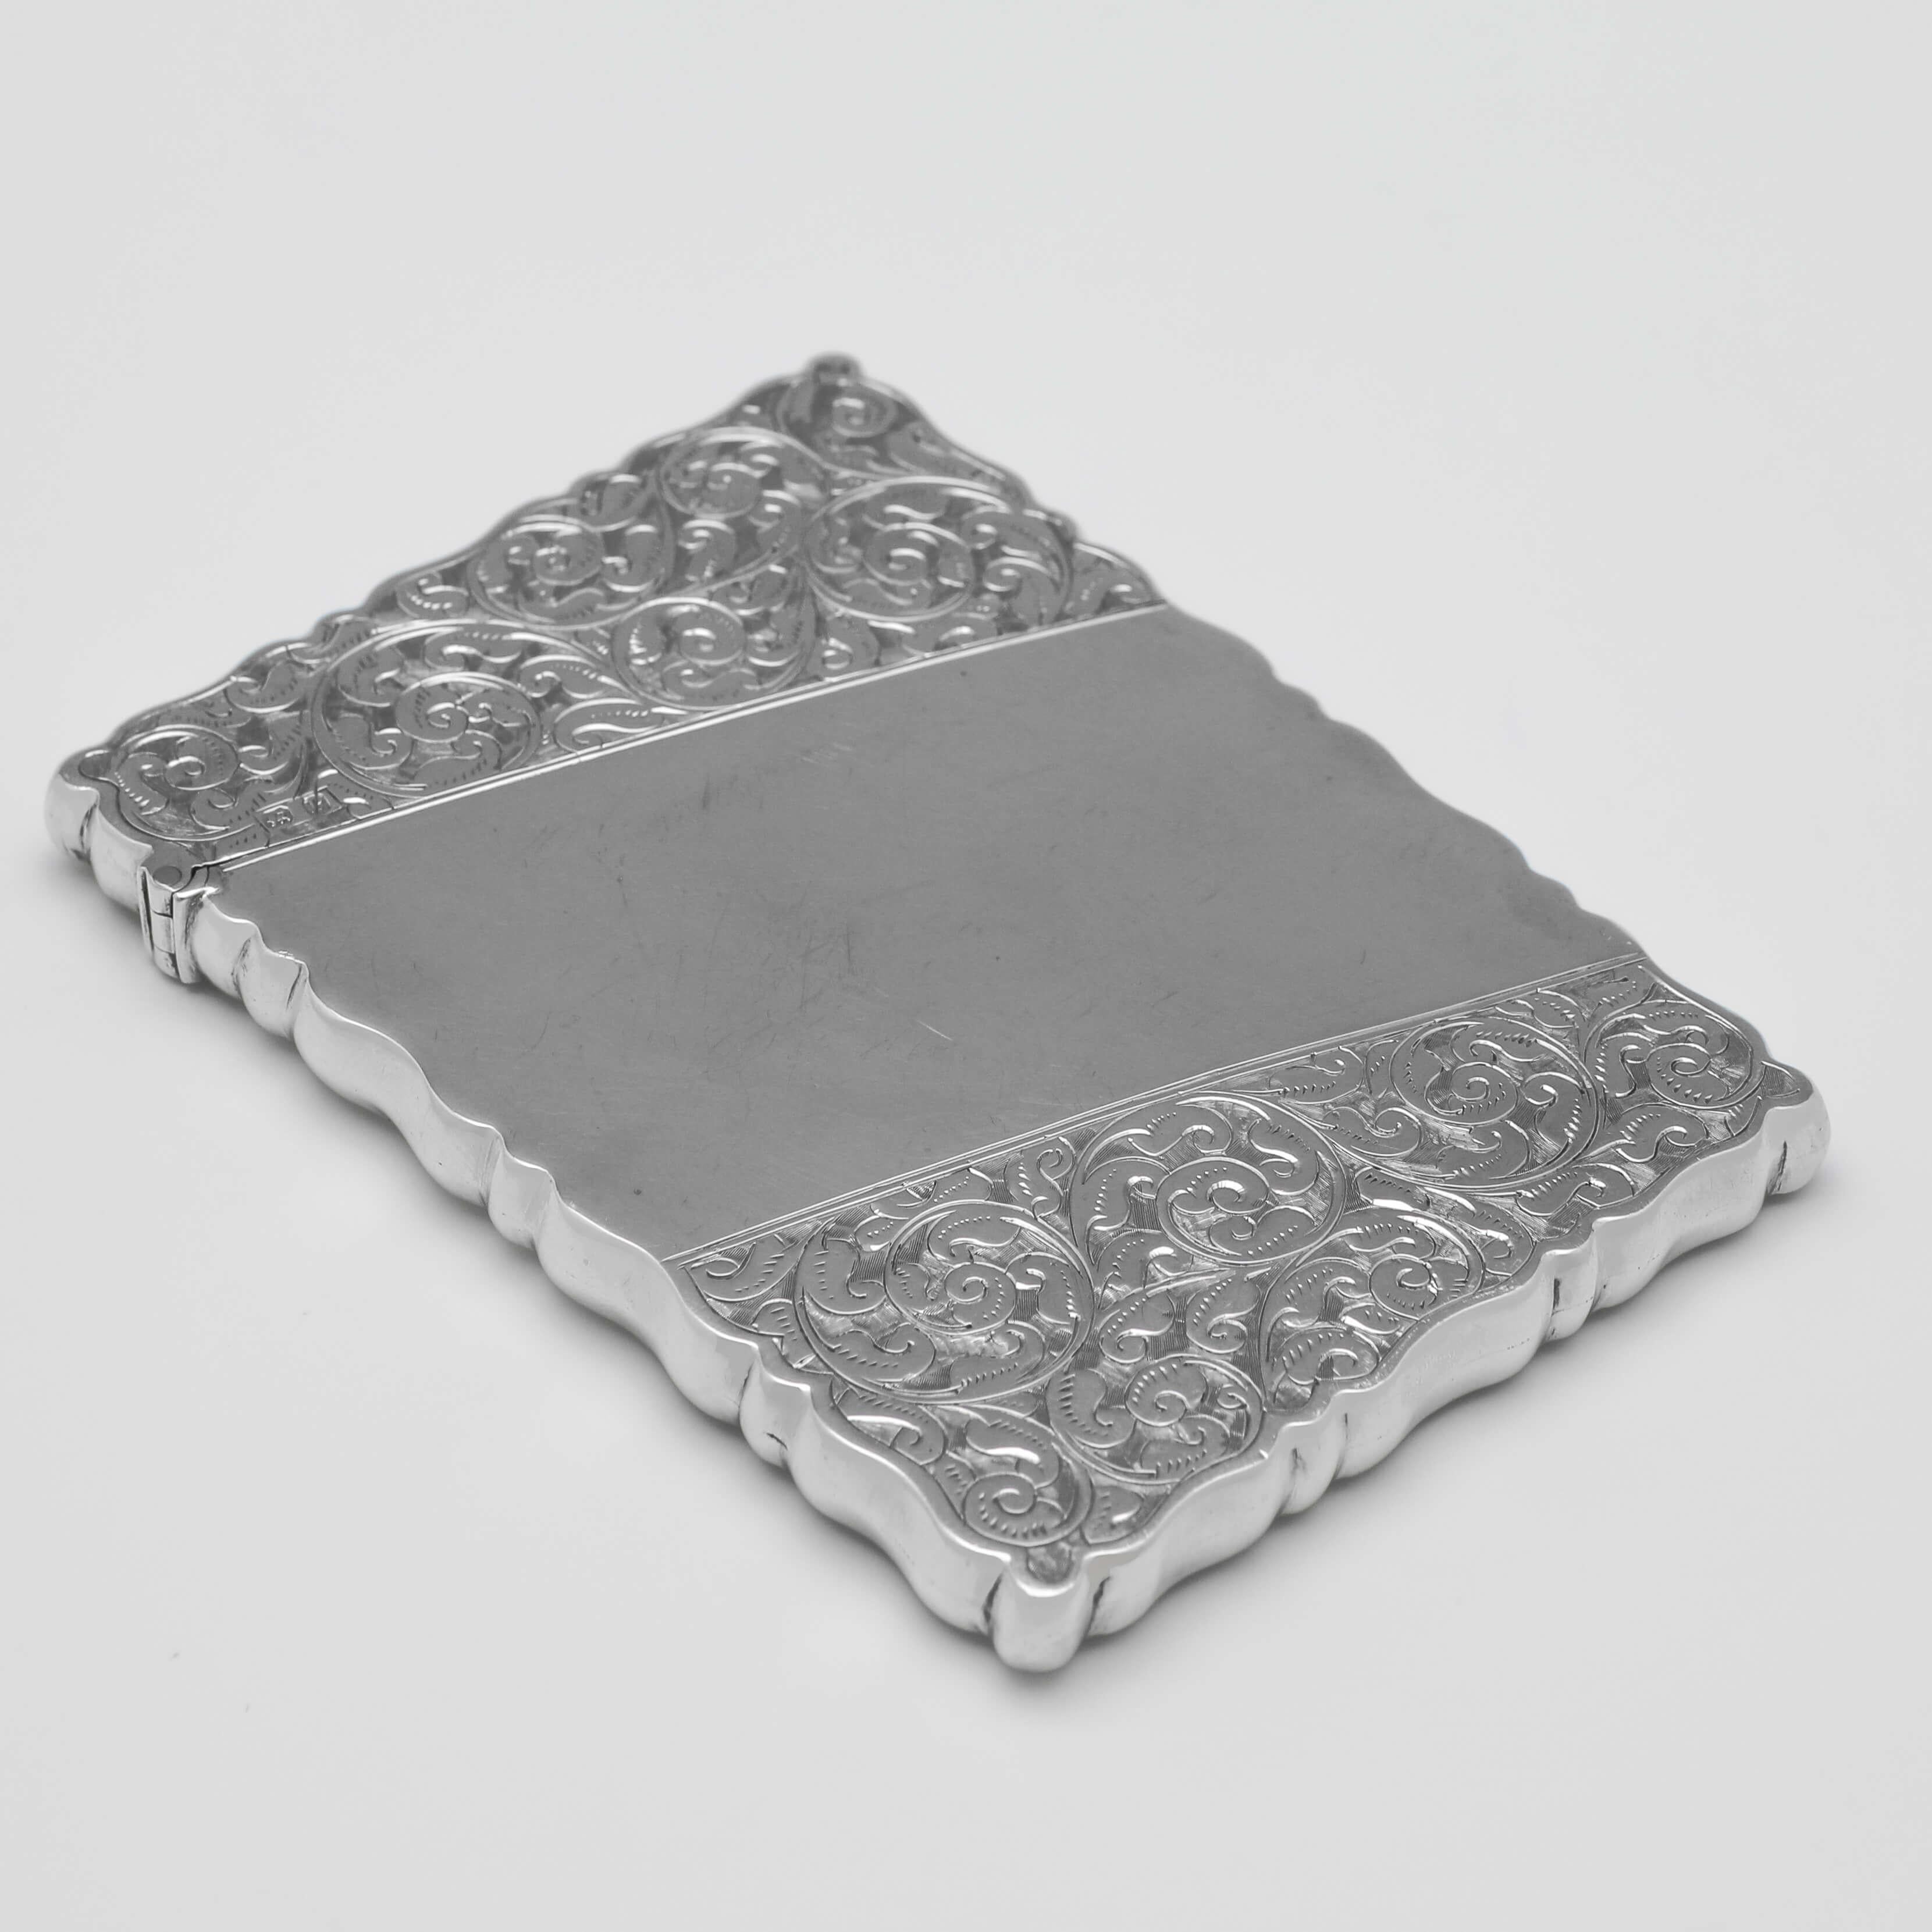 Hallmarked in Chester in 1898 by John Millward Banks, this attractive, Victorian, Antique Sterling Silver Card Case, features shaped sides, and floral scroll engraving. 

The card case measures 3.75